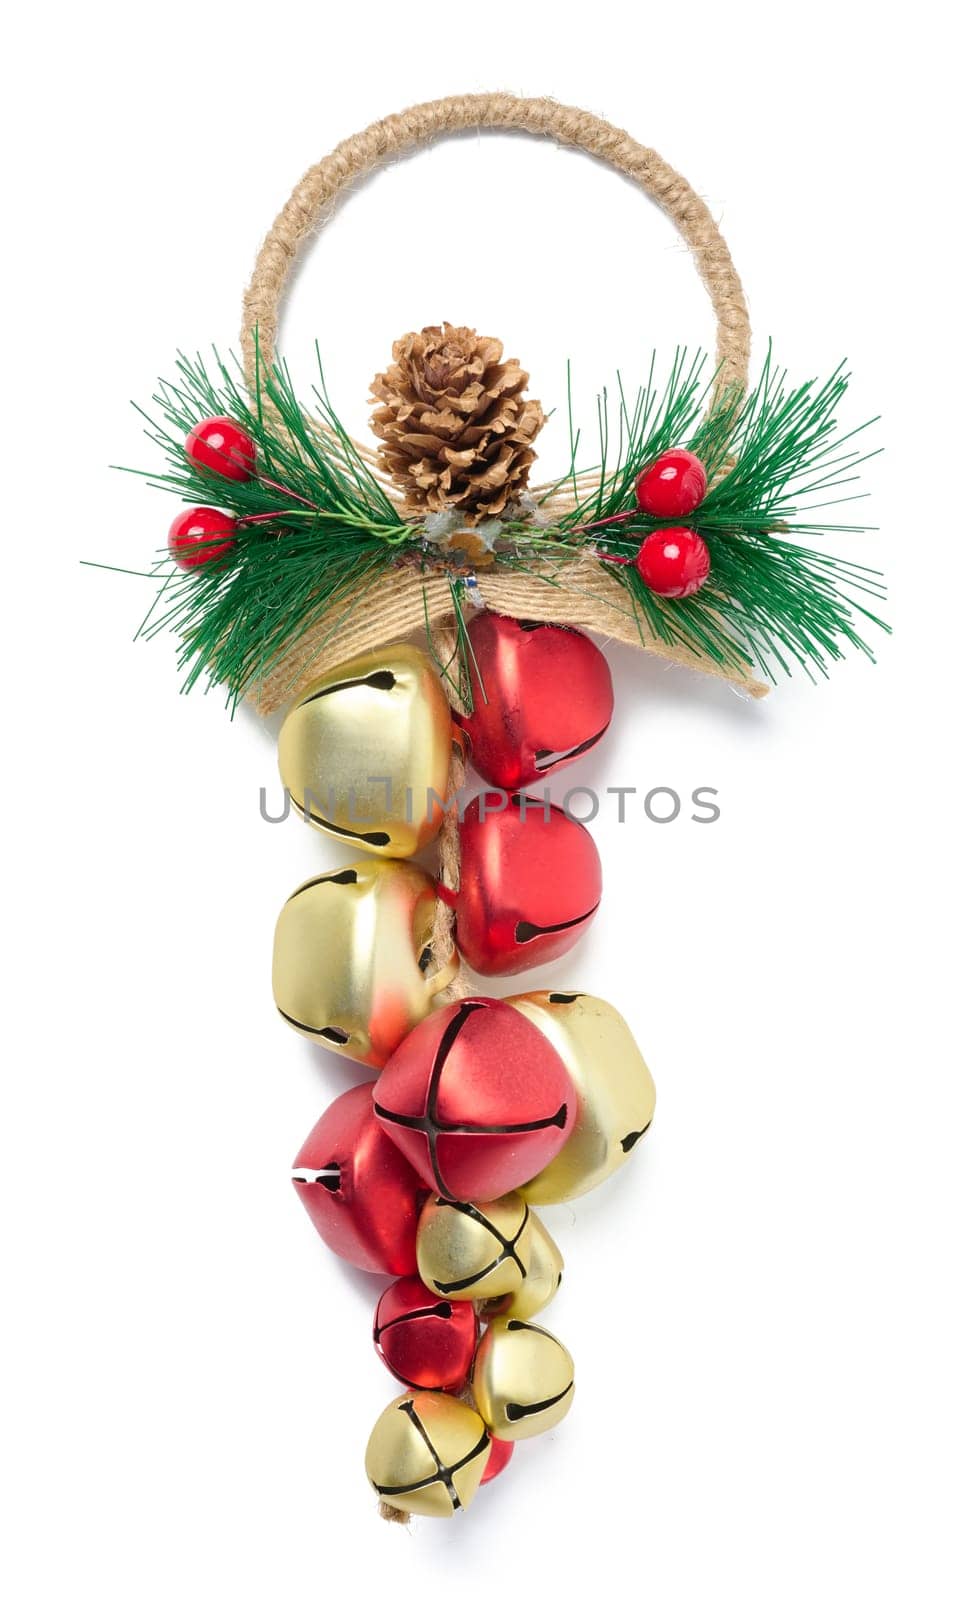 Decorative Christmas garland with bells on a white background